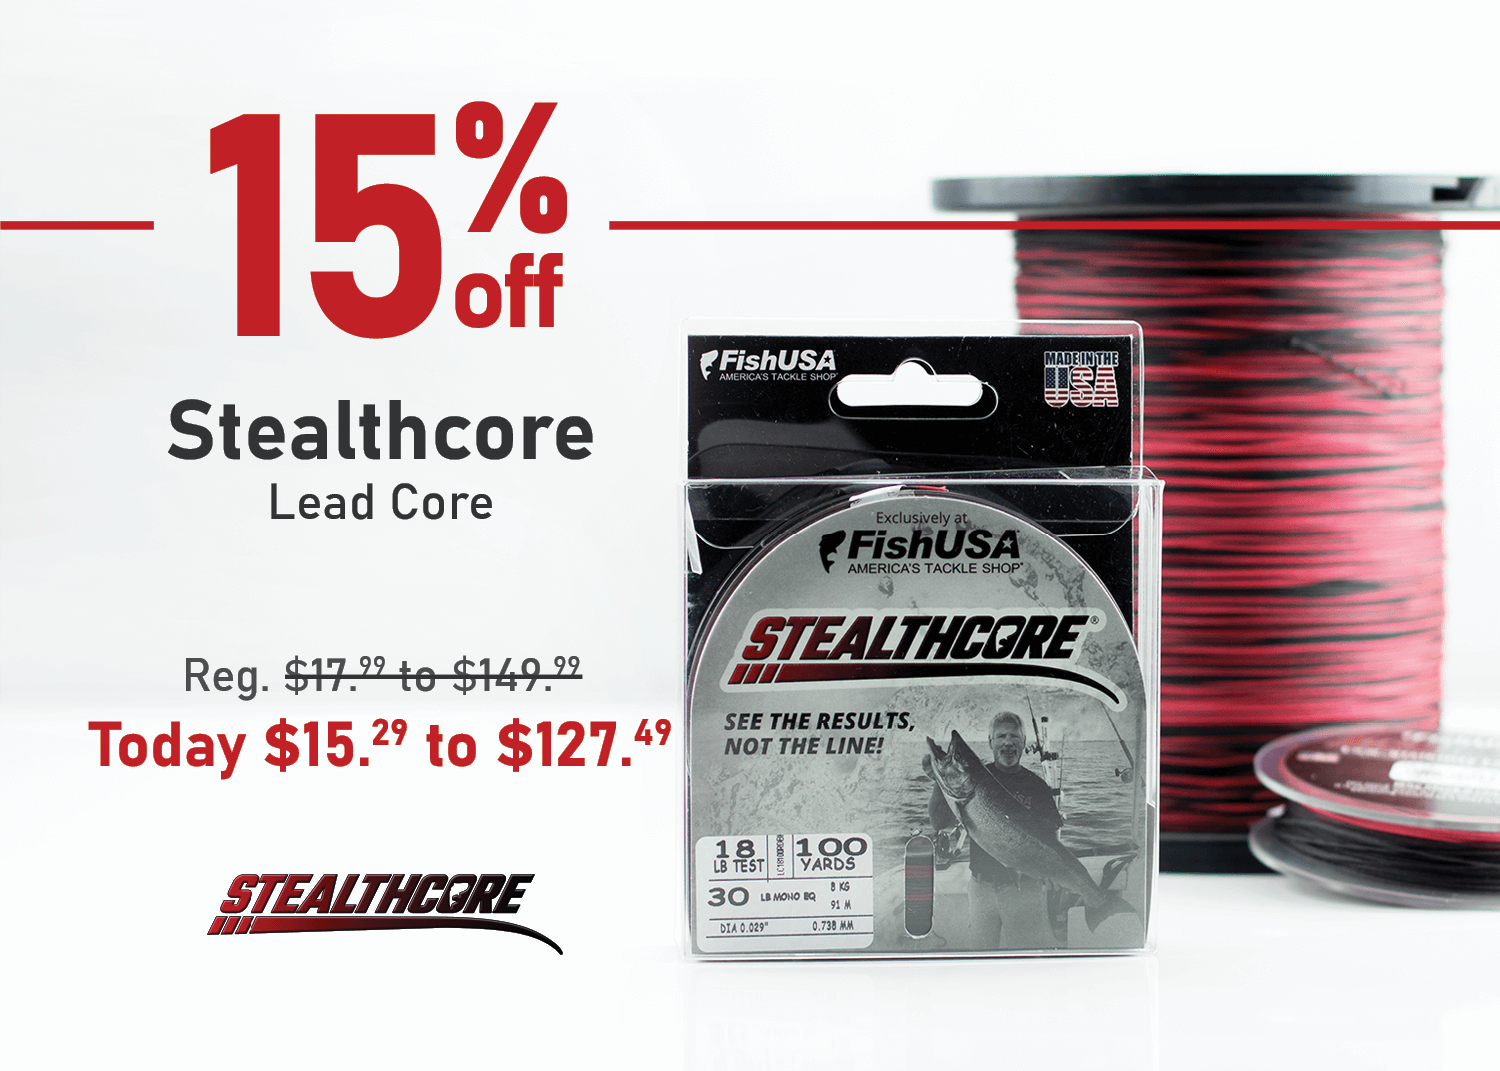 Save 15% on the Stealthcore Lead Core